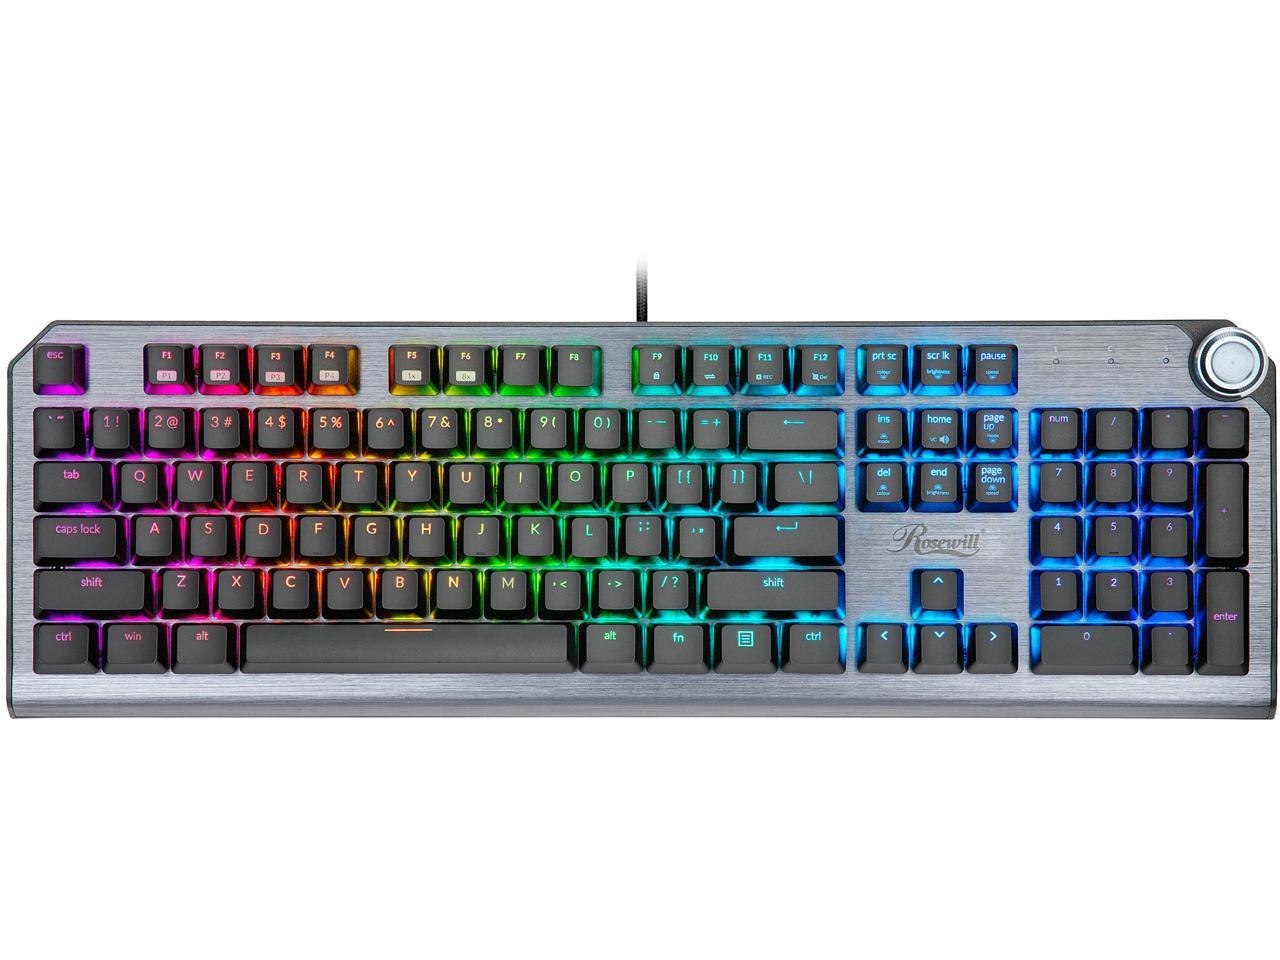 Rosewill Neon K91 RGB S Mechanical Gaming Keyboard With Cherry MX Silver Switches